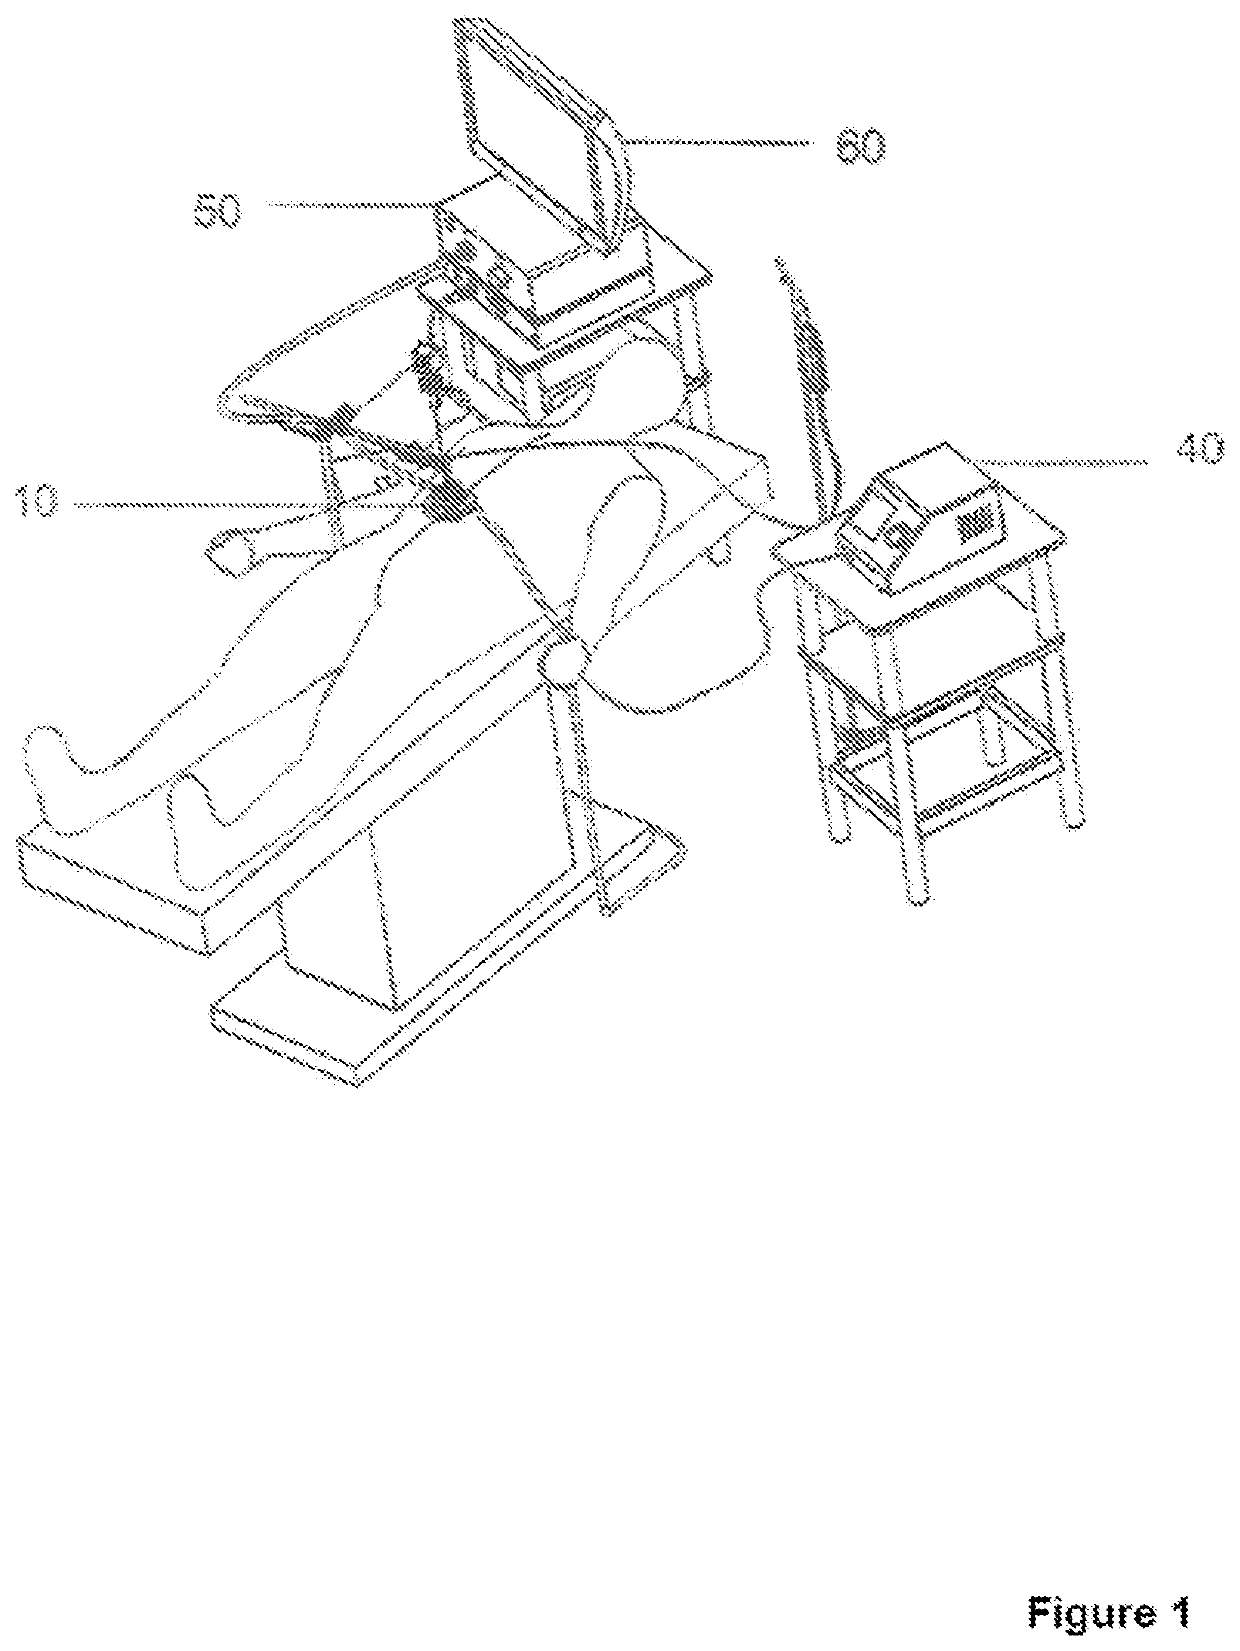 Ultrasonic aerosolization platform for the application of therapeutic substances to body cavities